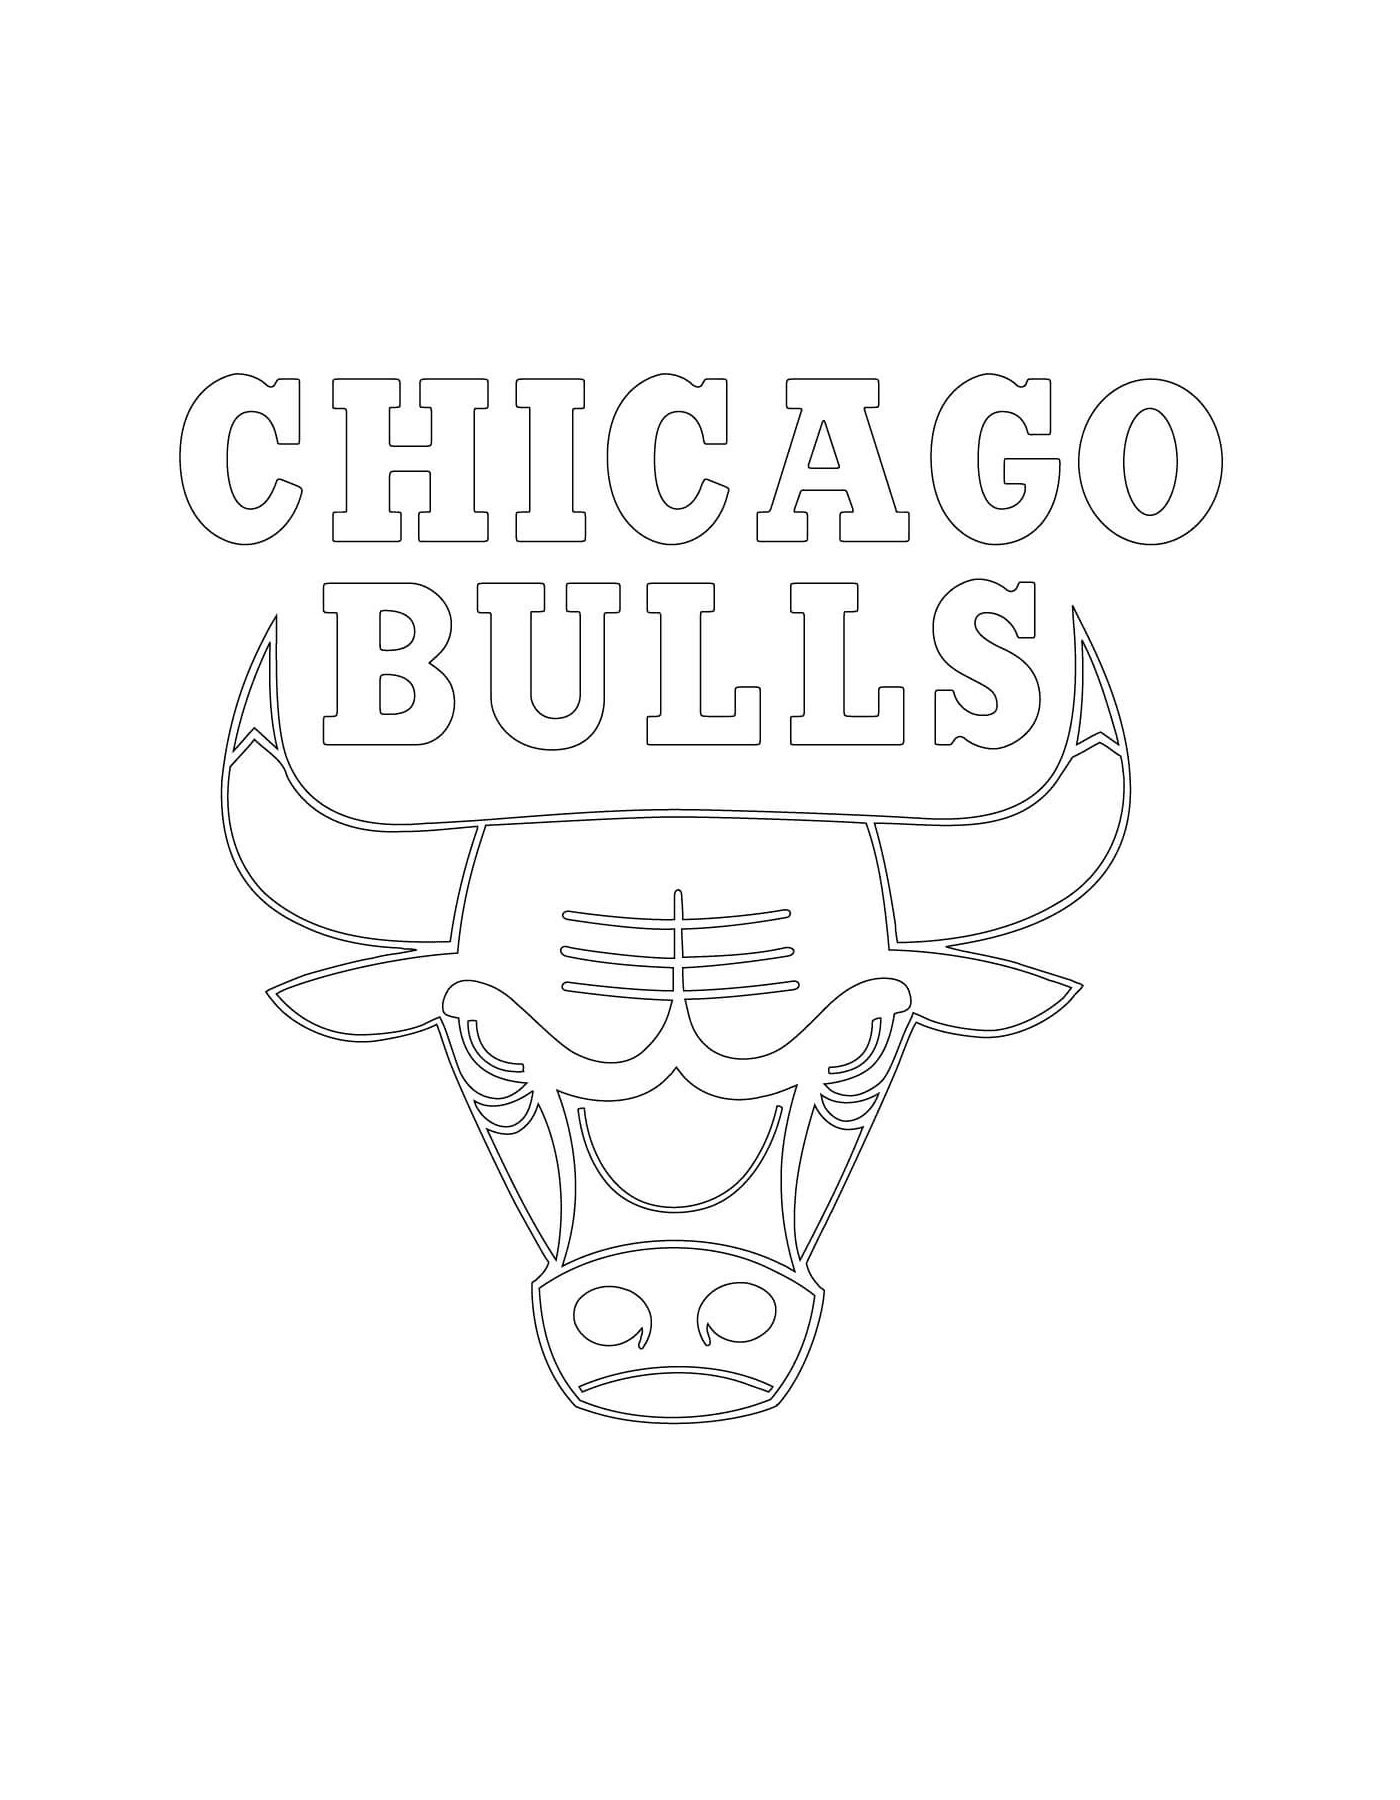  The logo of the Chicago Bulls of the NBA 